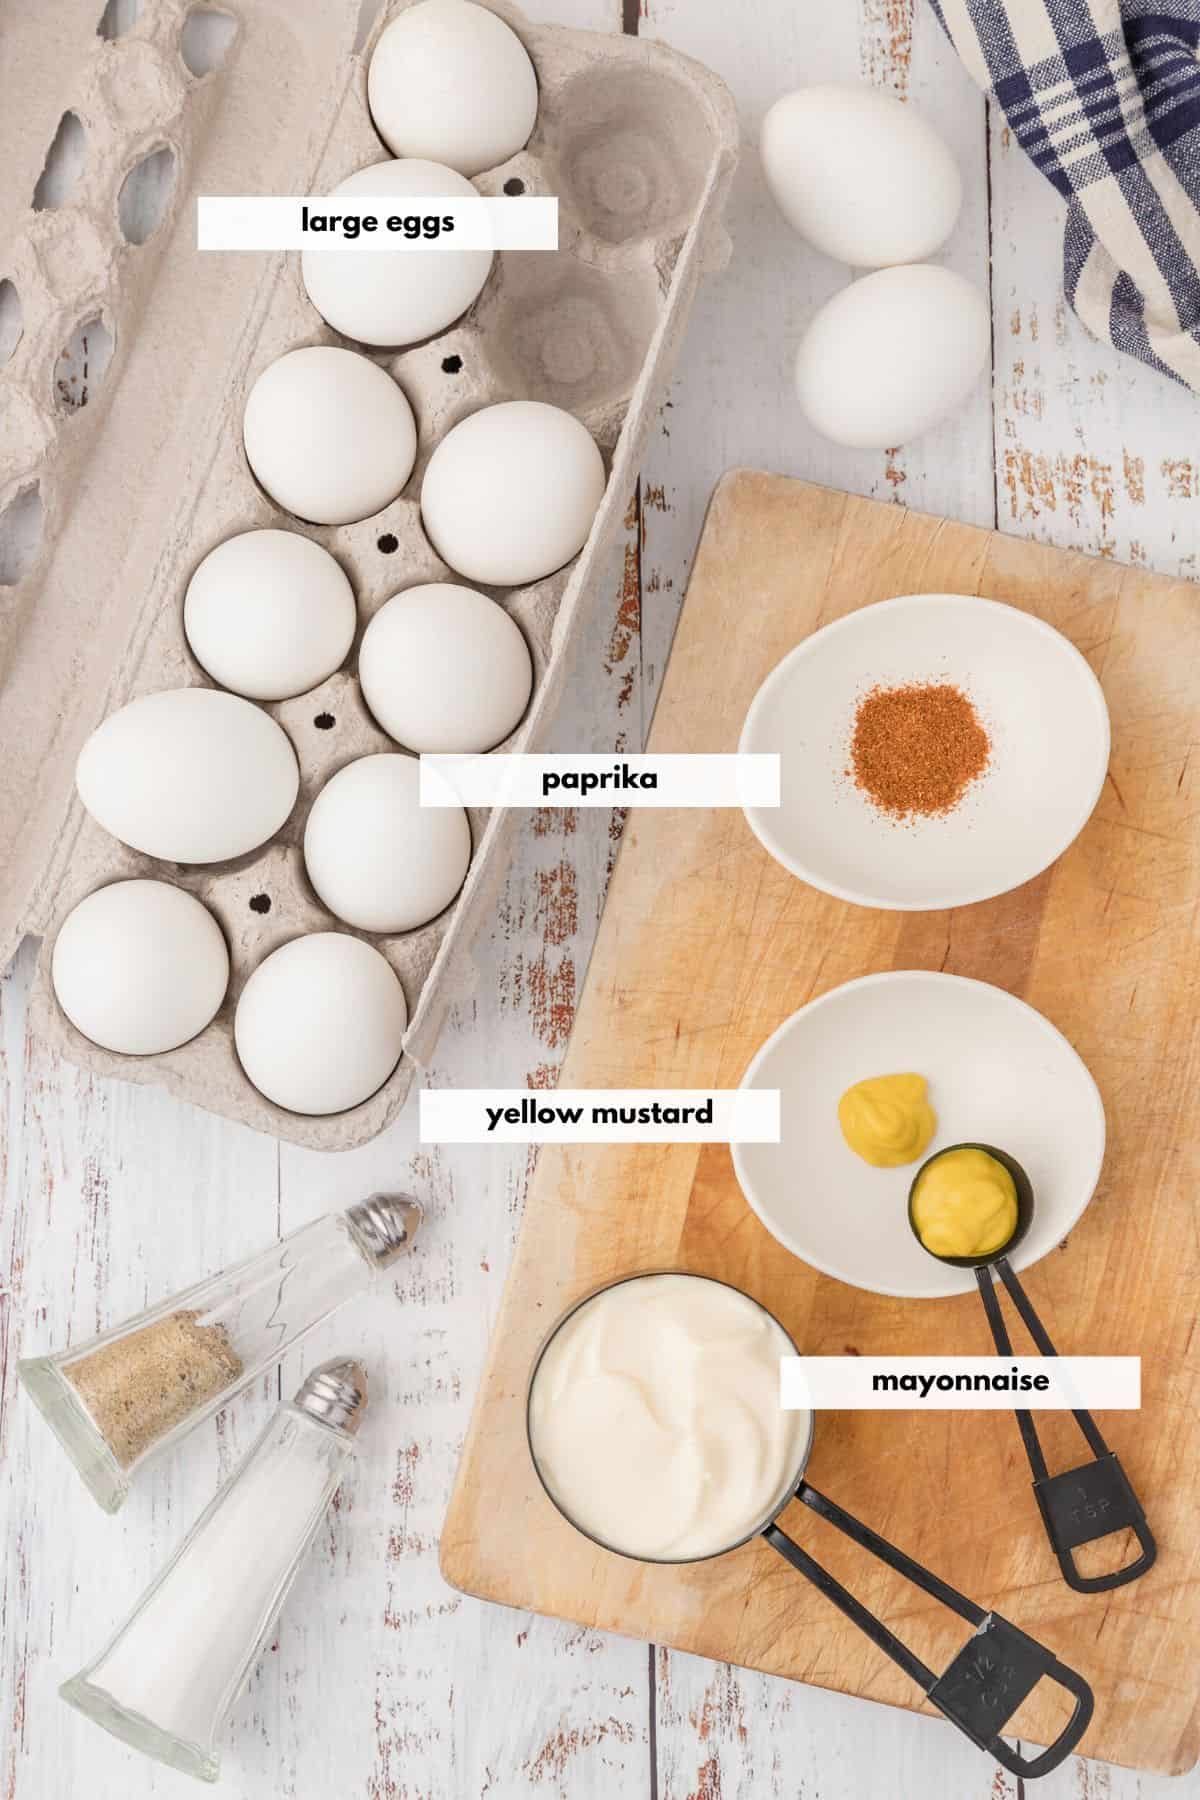 Ingredients to make deviled eggs including mayonnaise, yellow mustard, paprika, eggs, salt and pepper.